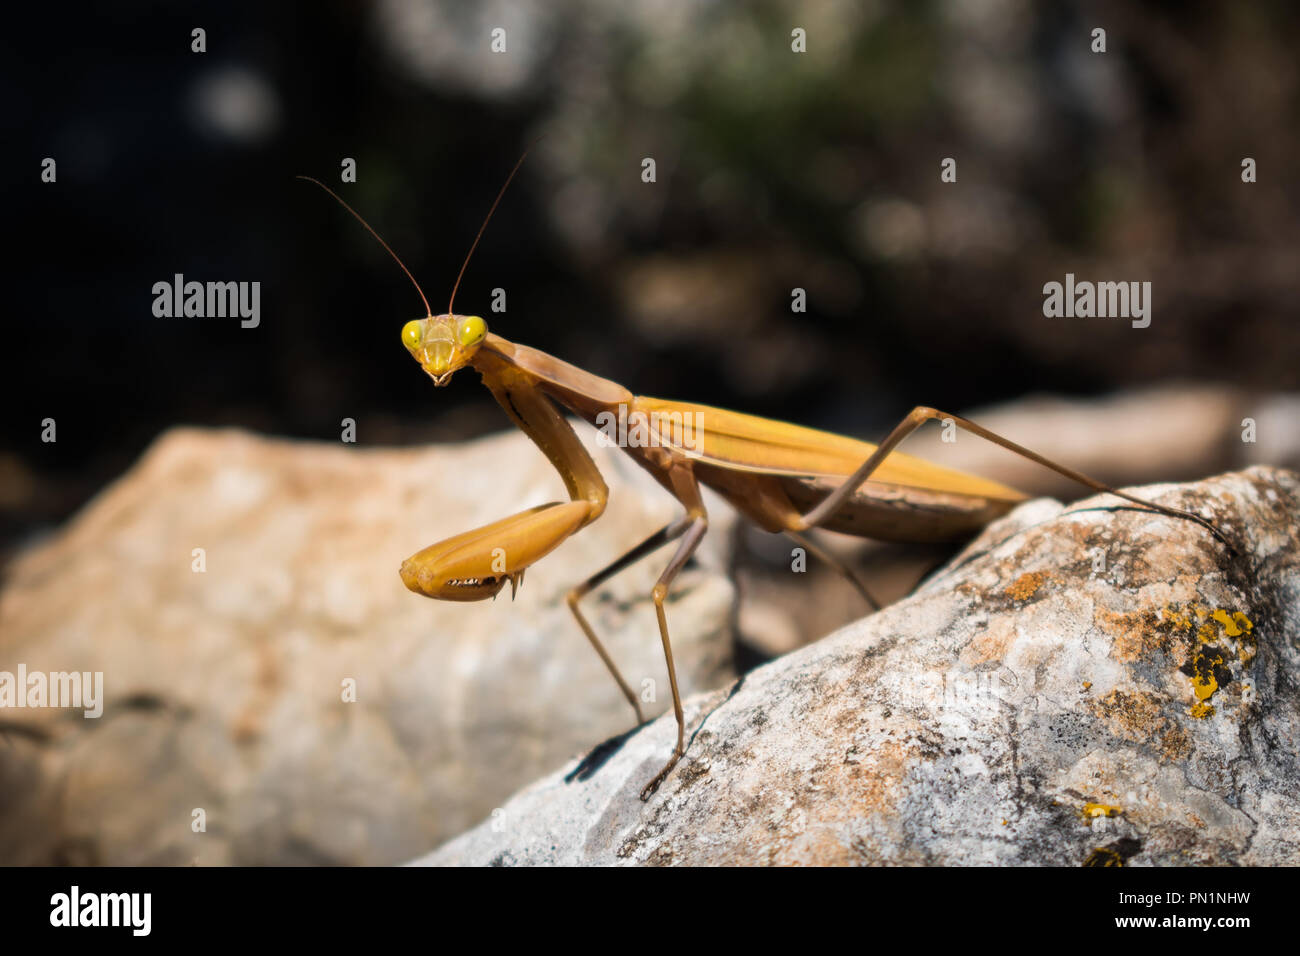 Close up of a yellow orange Praying Mantis (Mantodea) sitting on a rock looking straight at the camera. Stock Photo